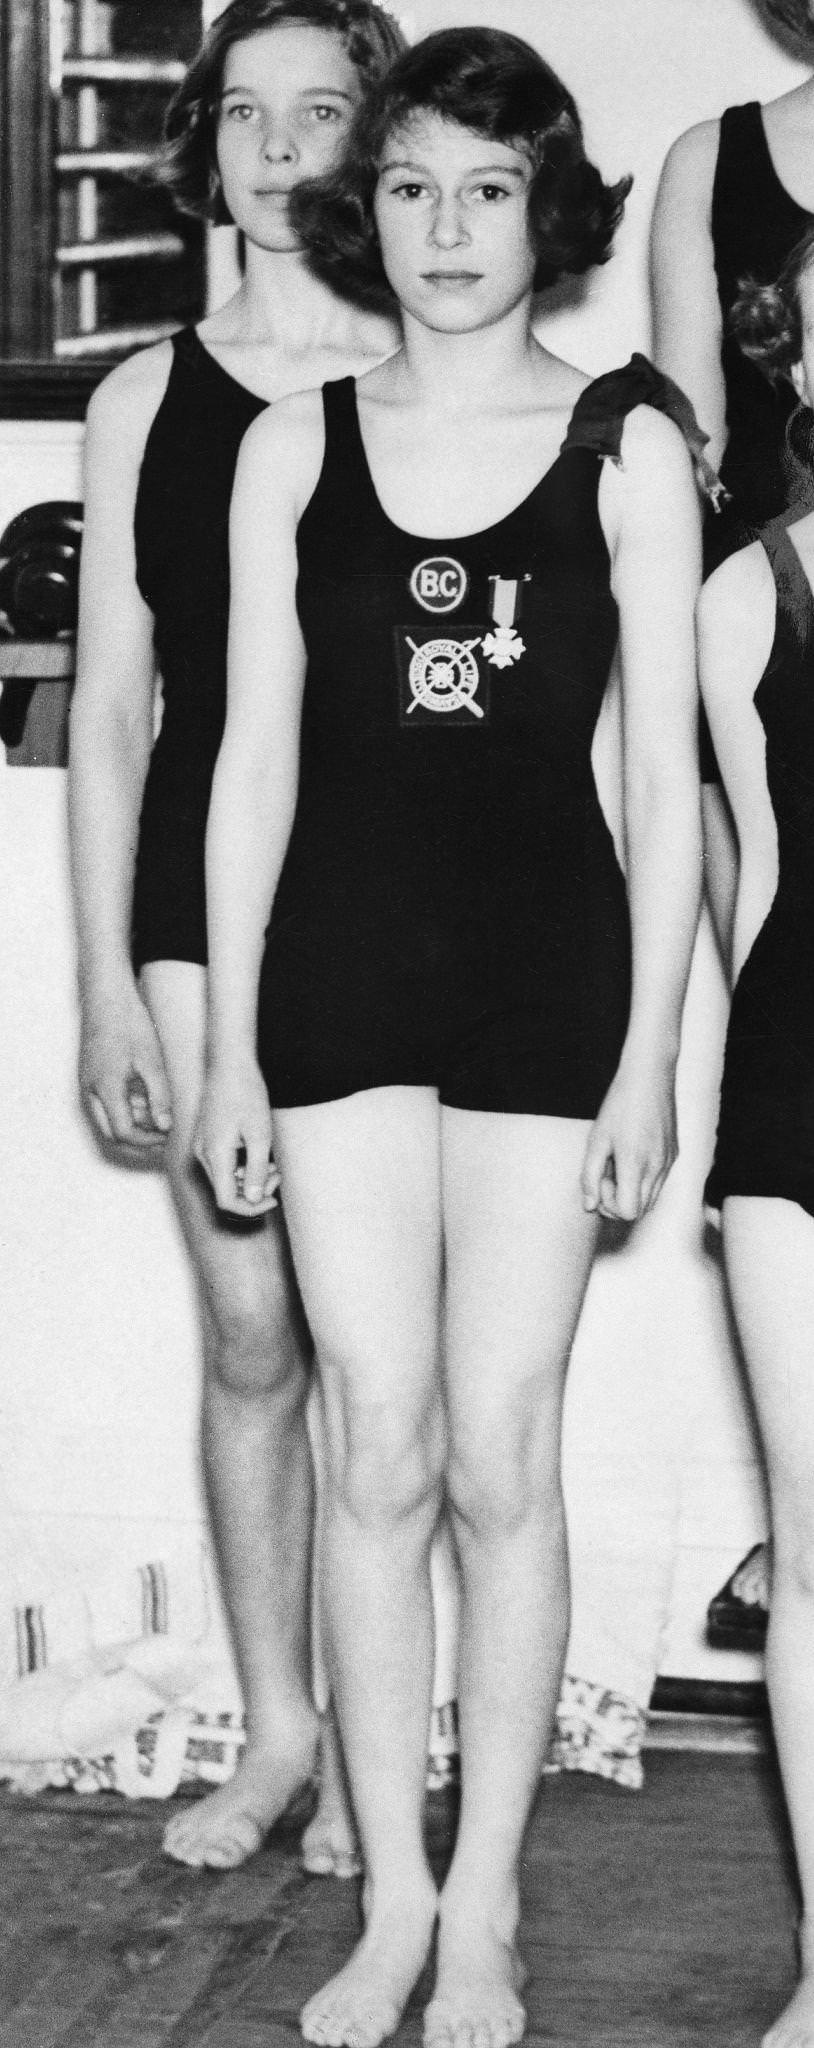 Elizabeth II as a teenager: Elizabeth II, Queen of England since 1953, won a children's swimming competition in London with 35 points in 1939. (Vintage property of ullstein bild)